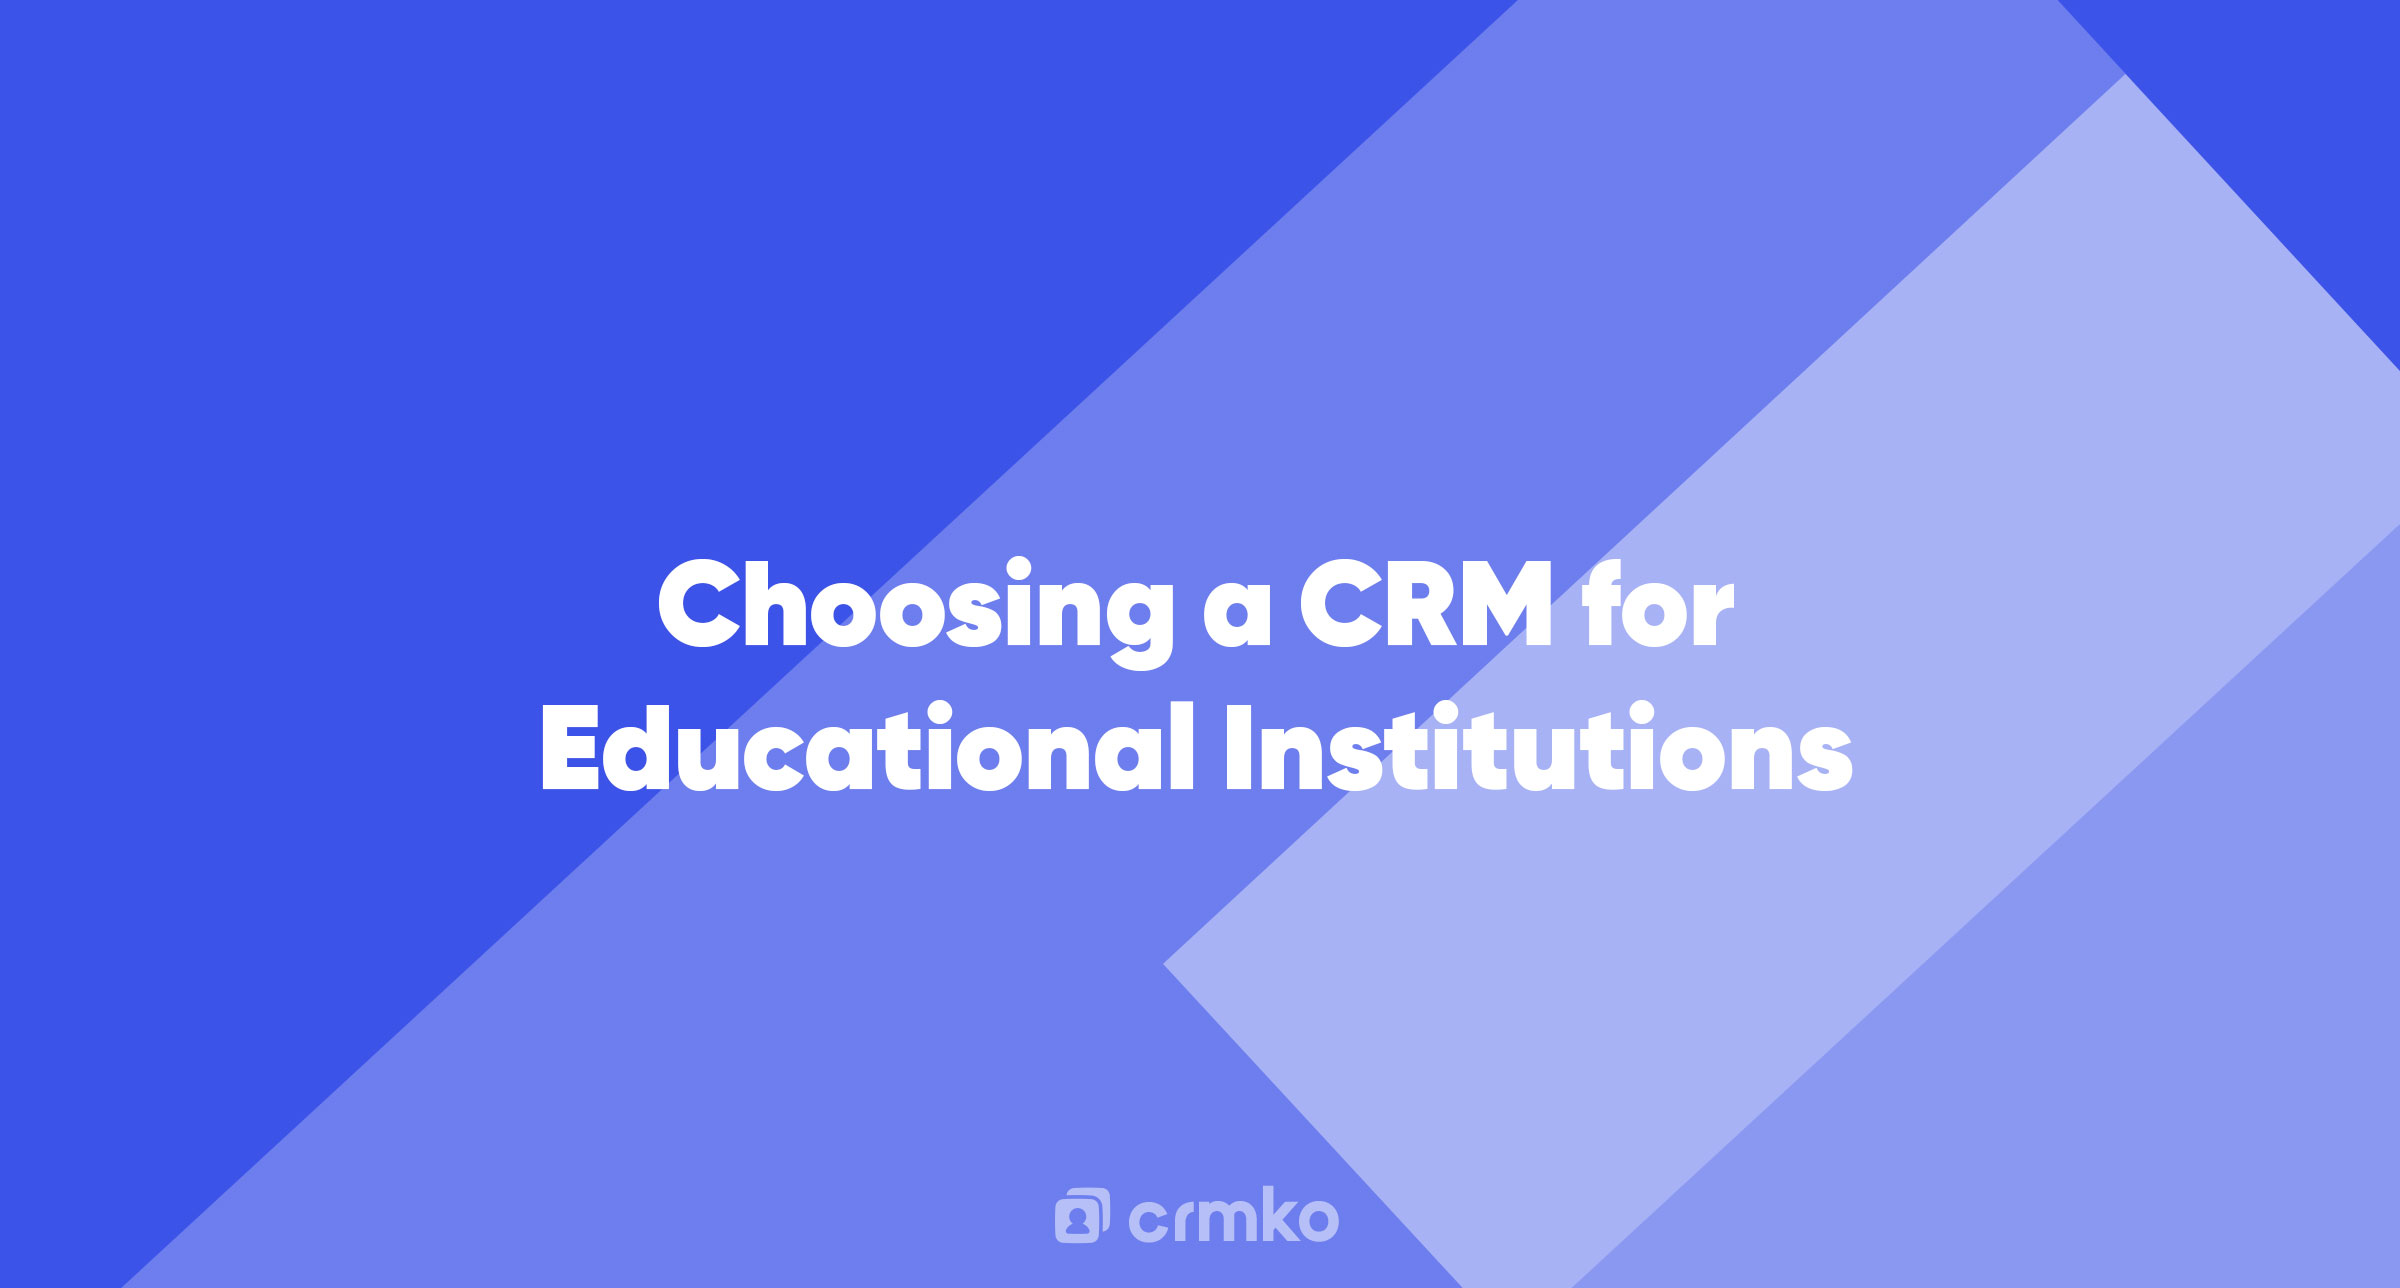 Article | Choosing a CRM for Educational Institutions